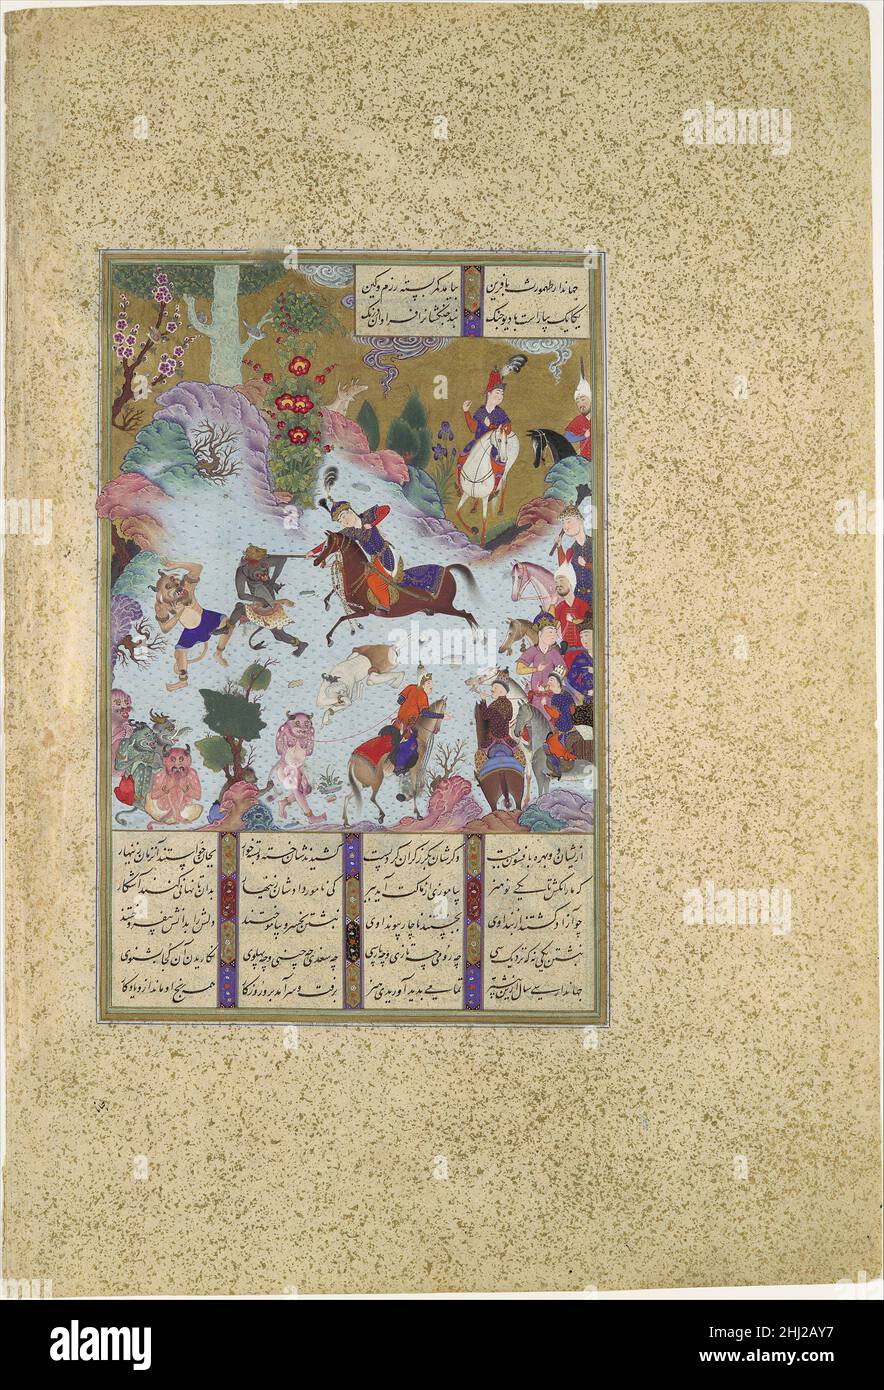 'Tahmuras Defeats the Divs', Folio 23v from the Shahnama (Book of Kings) of Shah Tahmasp ca. 1525 Abu'l Qasim Firdausi Tahmuras, shown here galloping across a meadow, defeated the divs (demons); in exchange for their lives, they taught him the art of writing. This work is attributed to Sultan Muhammad, the master painter and chief administrator of the first generation of artists of this manuscript. The humor of the divs’ ghastly faces and gestures and the painterly treatment of their spotty skin are typical of Sultan Muhammad’s style.. 'Tahmuras Defeats the Divs', Folio 23v from the Shahnama ( Stock Photo